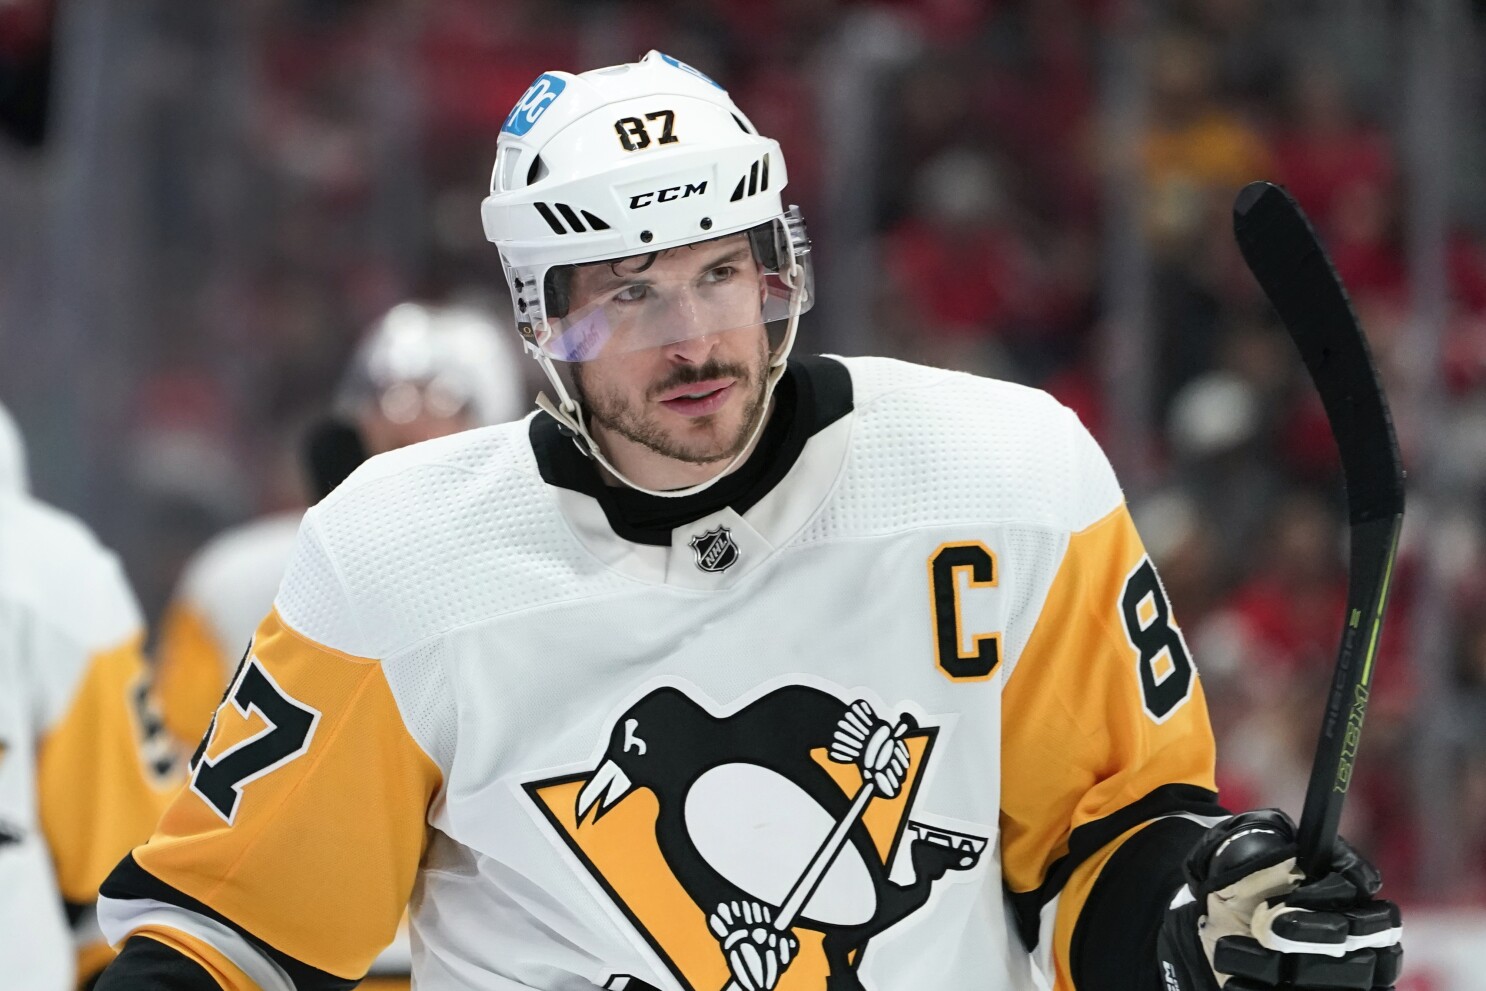 NHL 17 Gives Look At League's Future